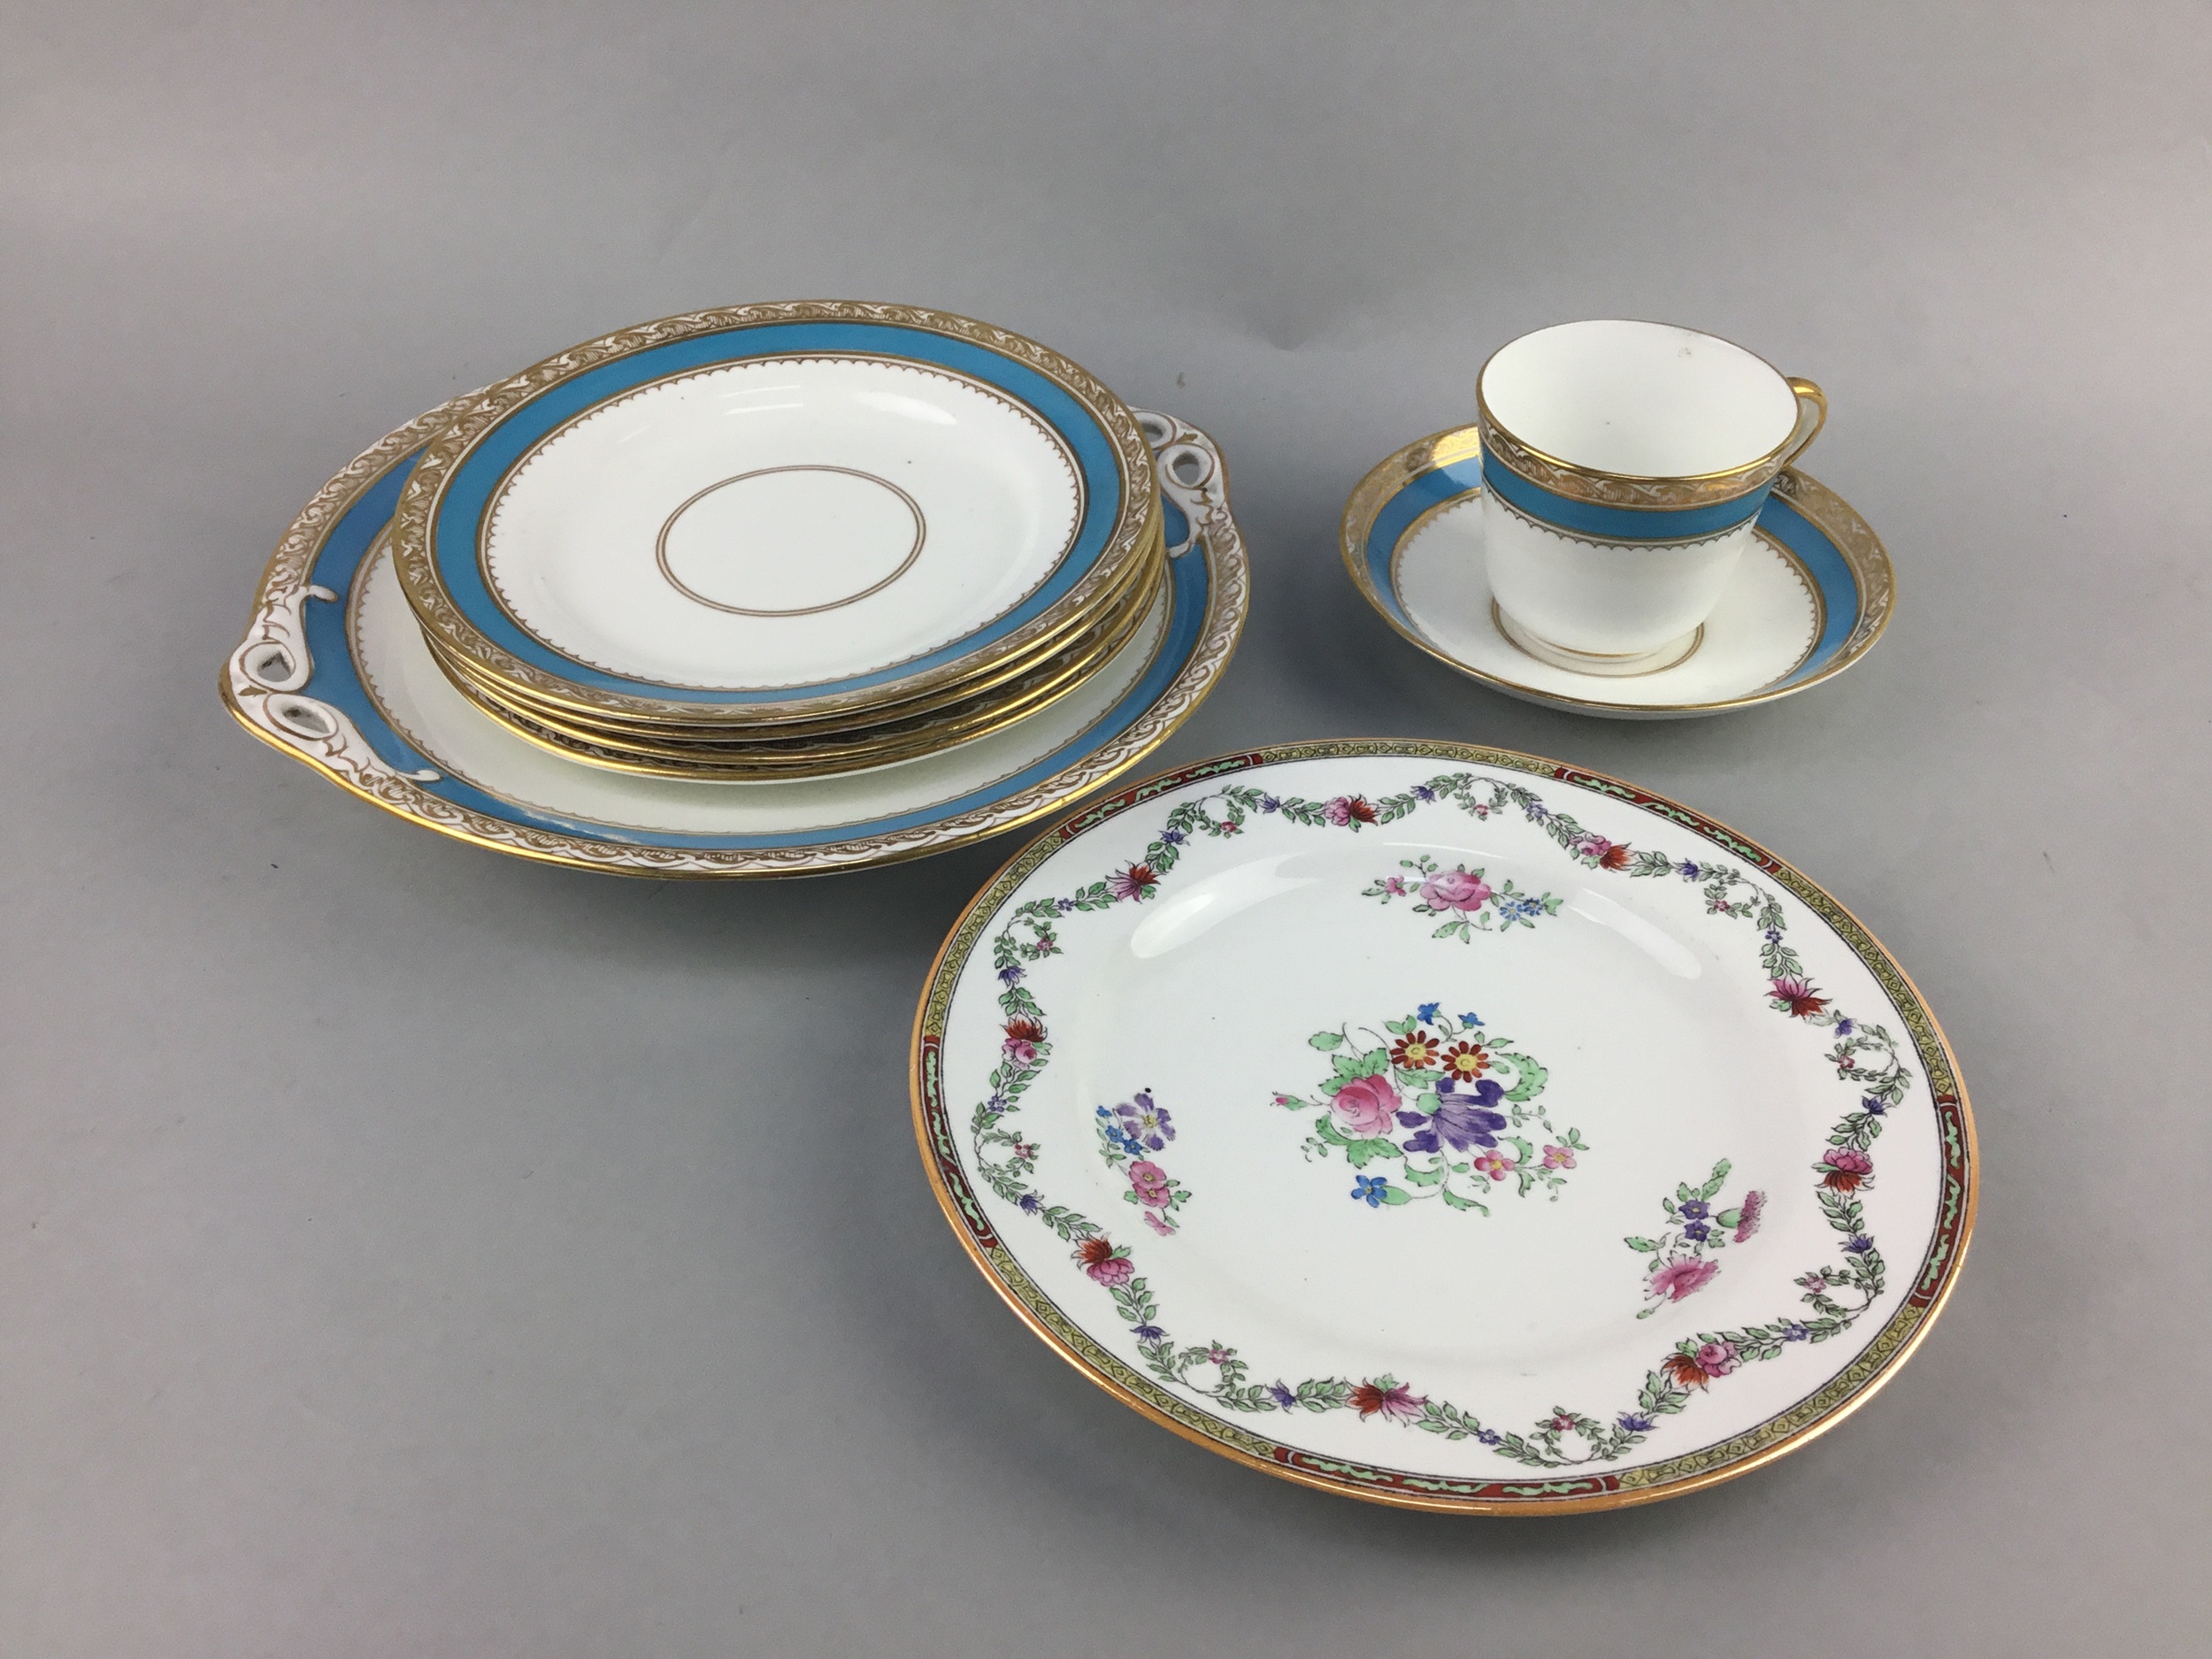 A EARLY 20TH CENTURY PART TEA SERVICE ALONG WITH SPODE PLATES